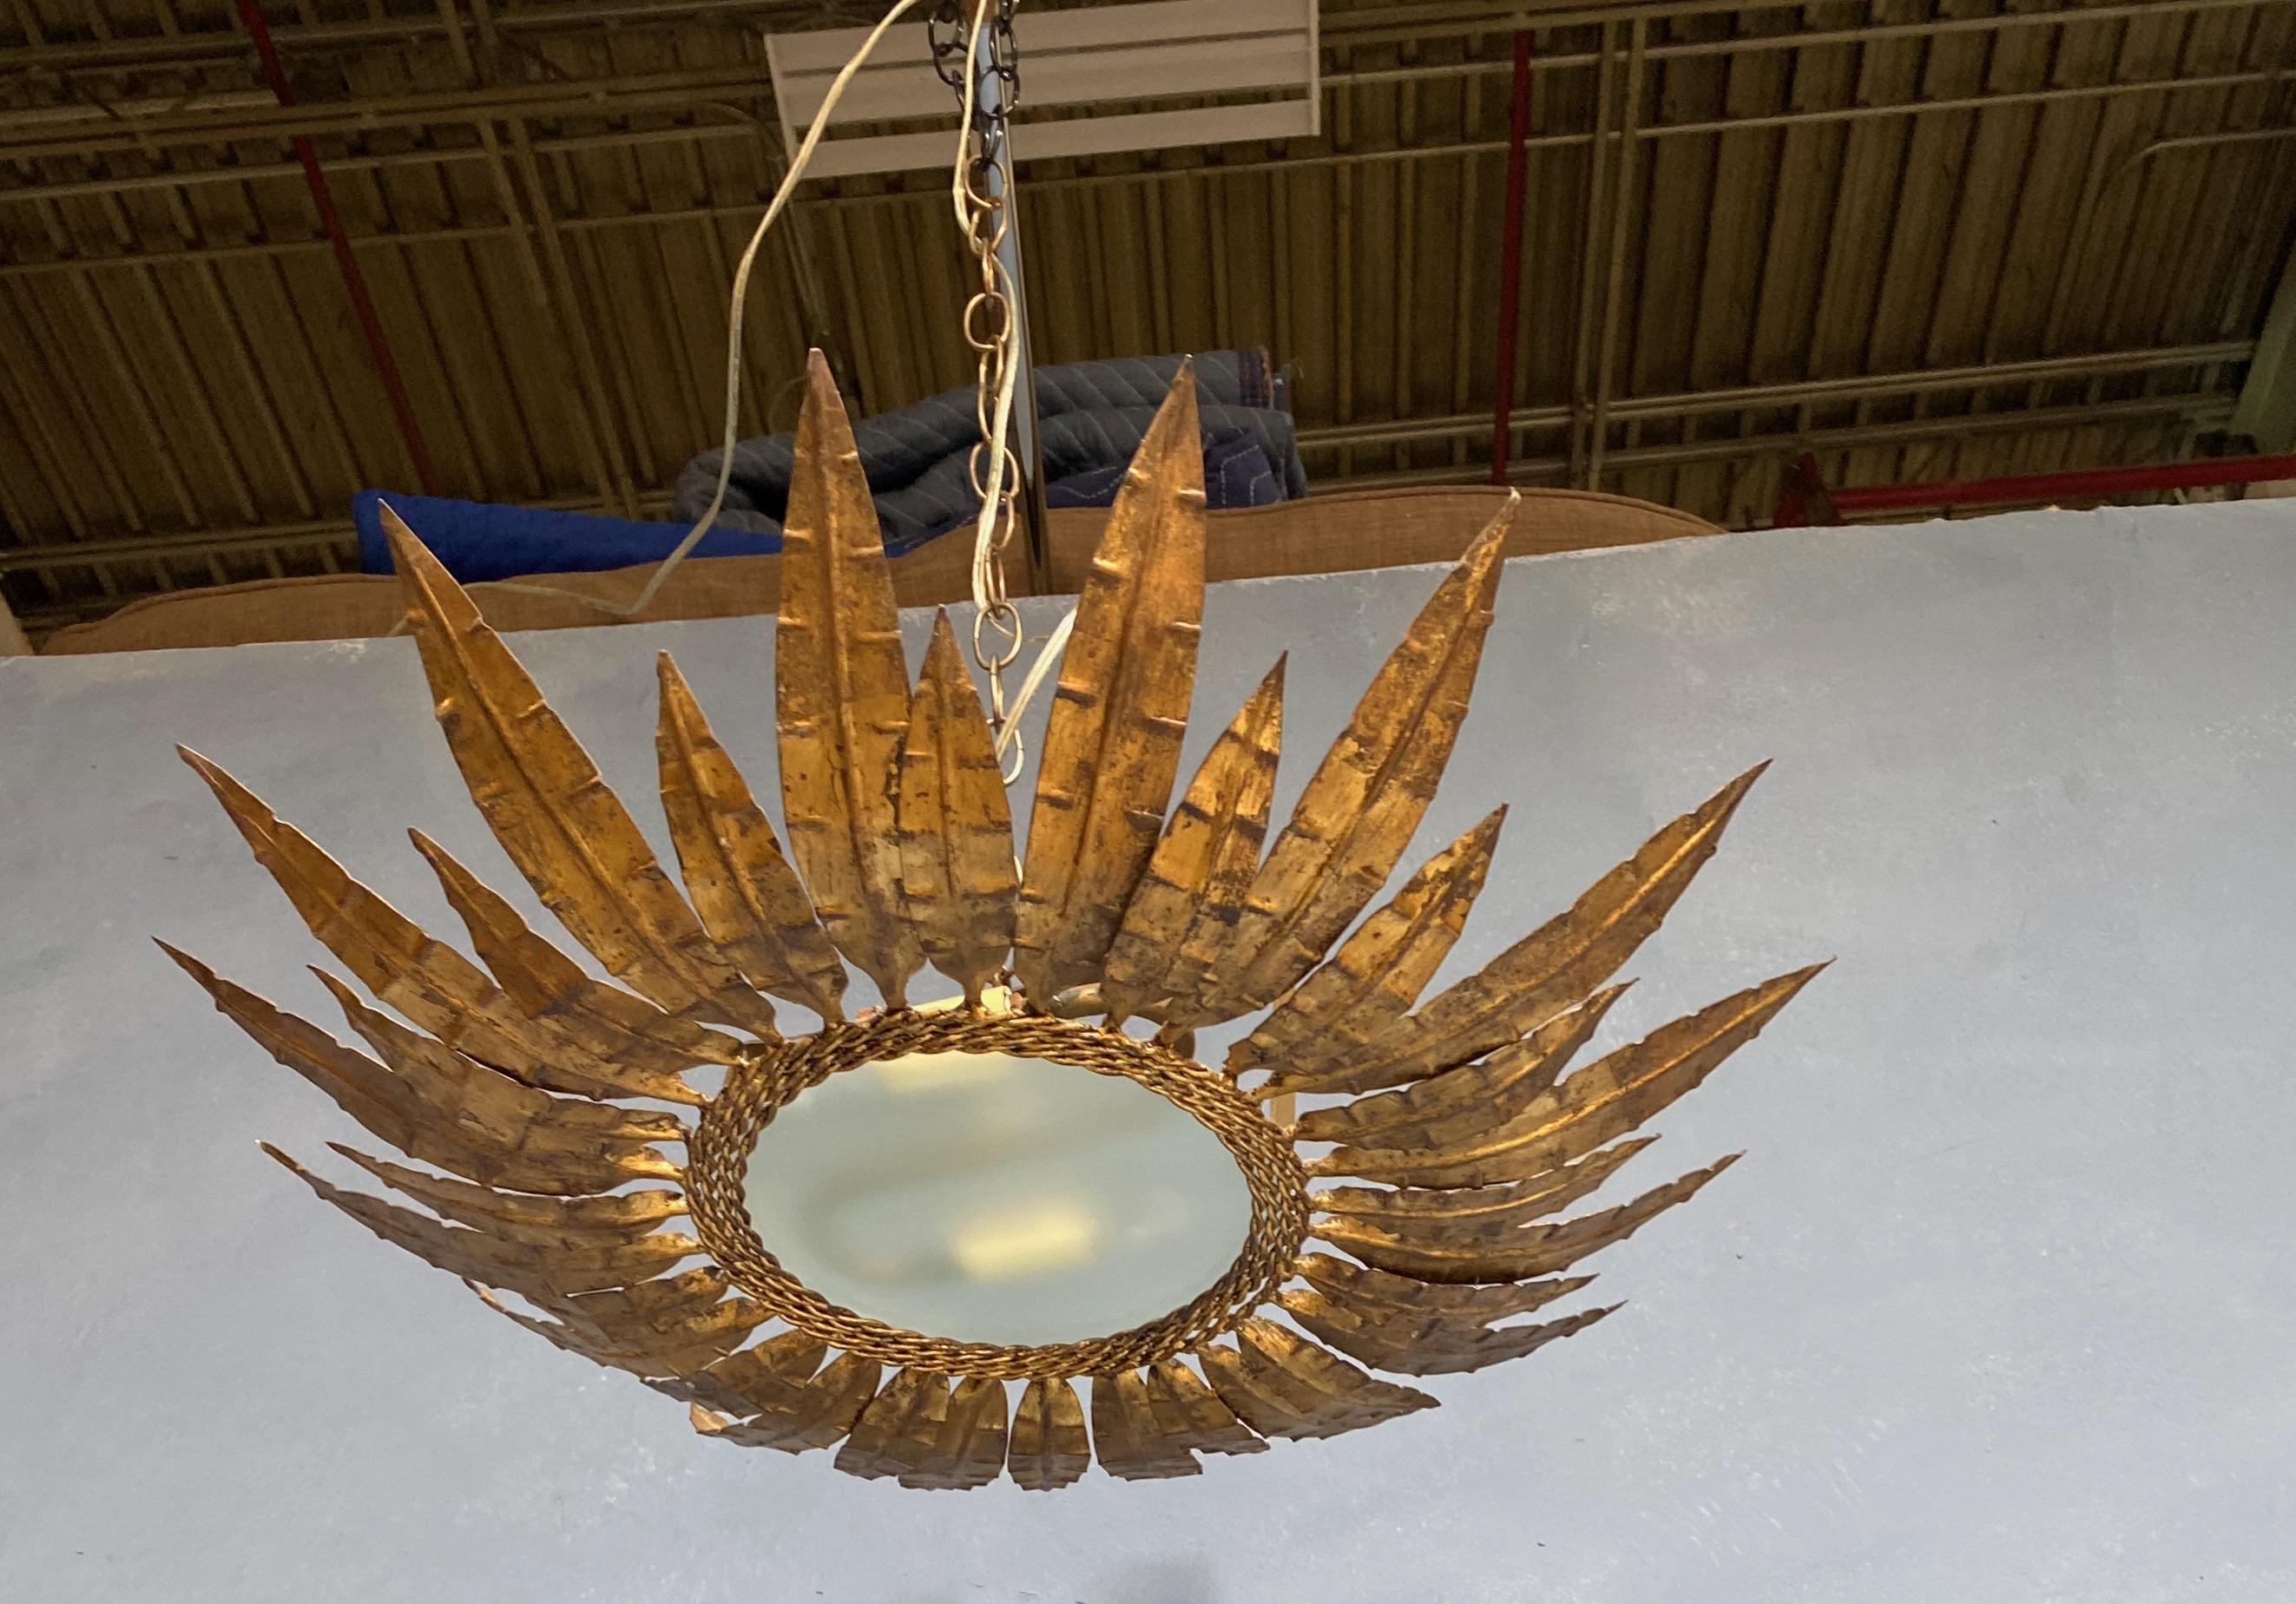 This magnificent flush mount ceiling fixture is a product of the 1950s Spanish design aesthetic. It features two alternating layers of leaf or feather motifs, all connected by four strands of twisted braids. The hand-applied finish presents a rich